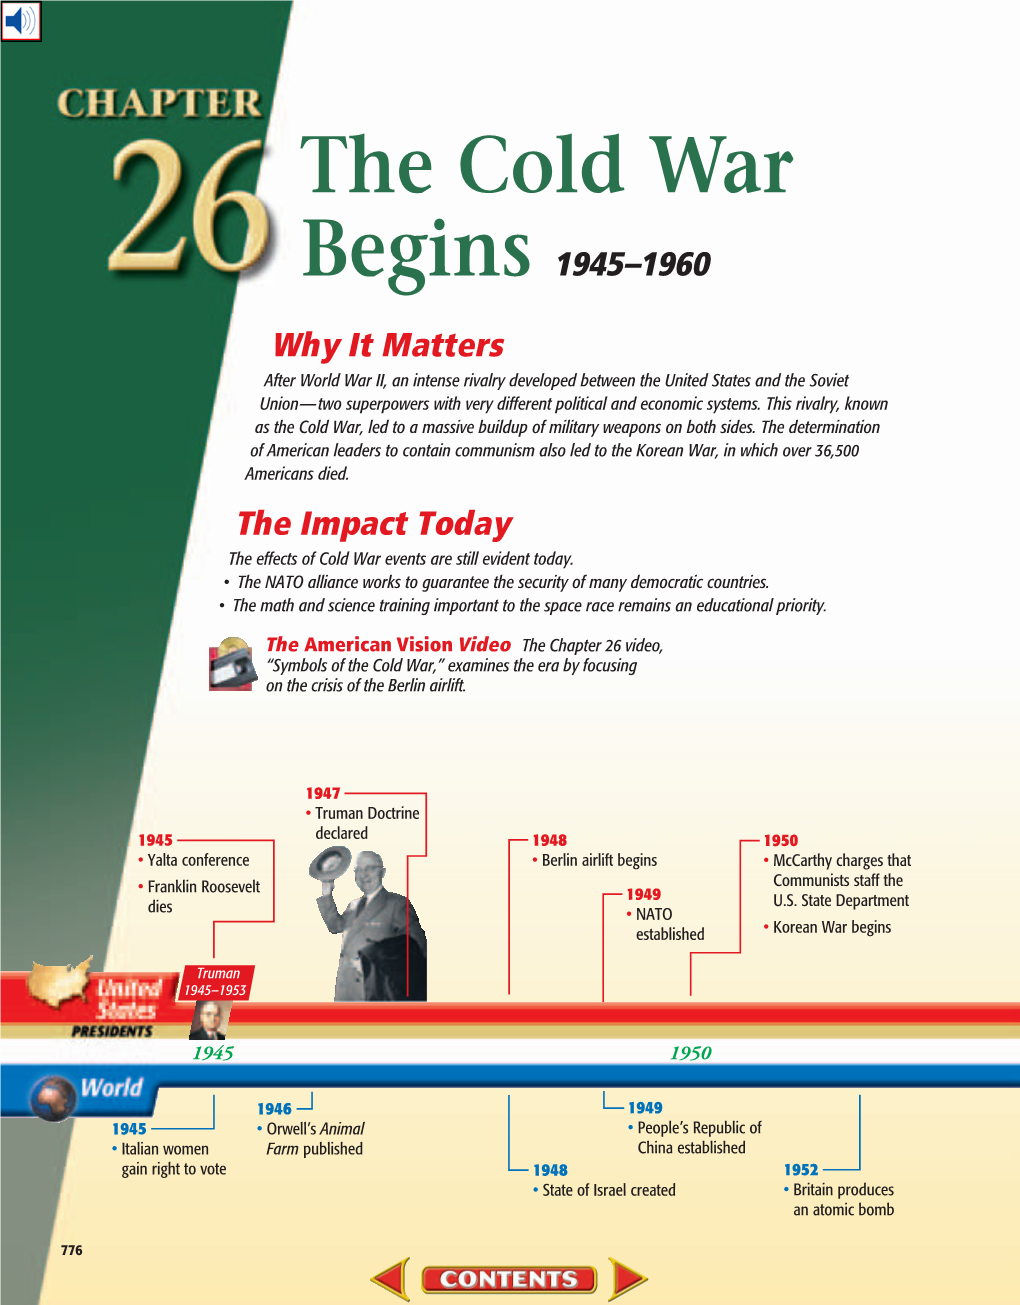 Chapter 26: the Cold War Begins, 1945-1960